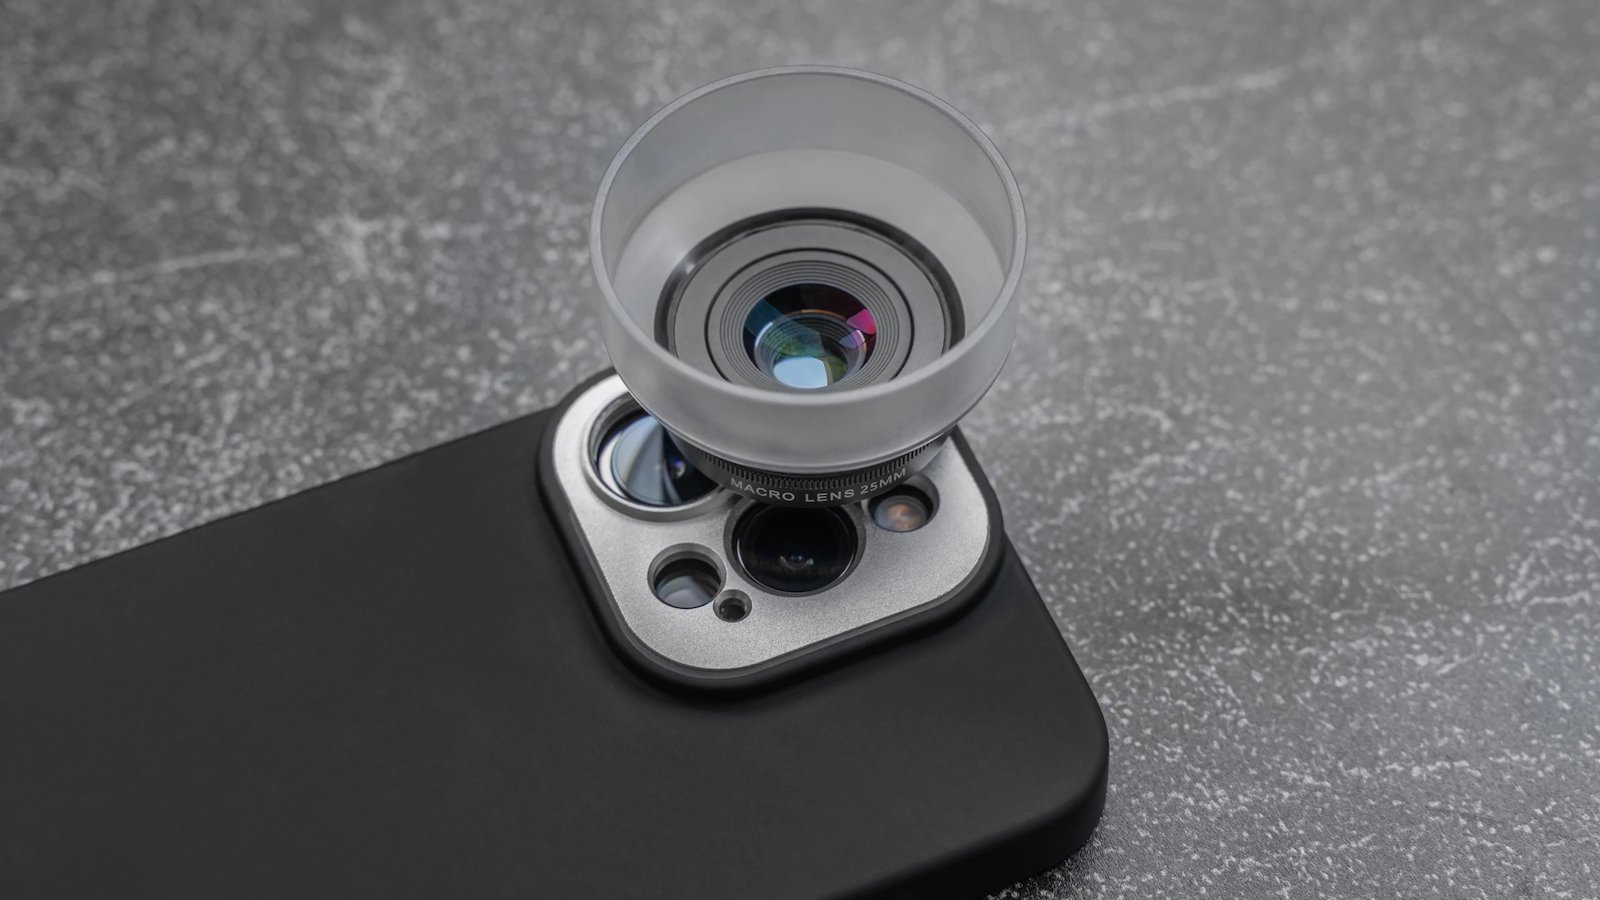 Sandmarc Macro Lens for iPhone 14 series captures vivid details straight from your iPhone